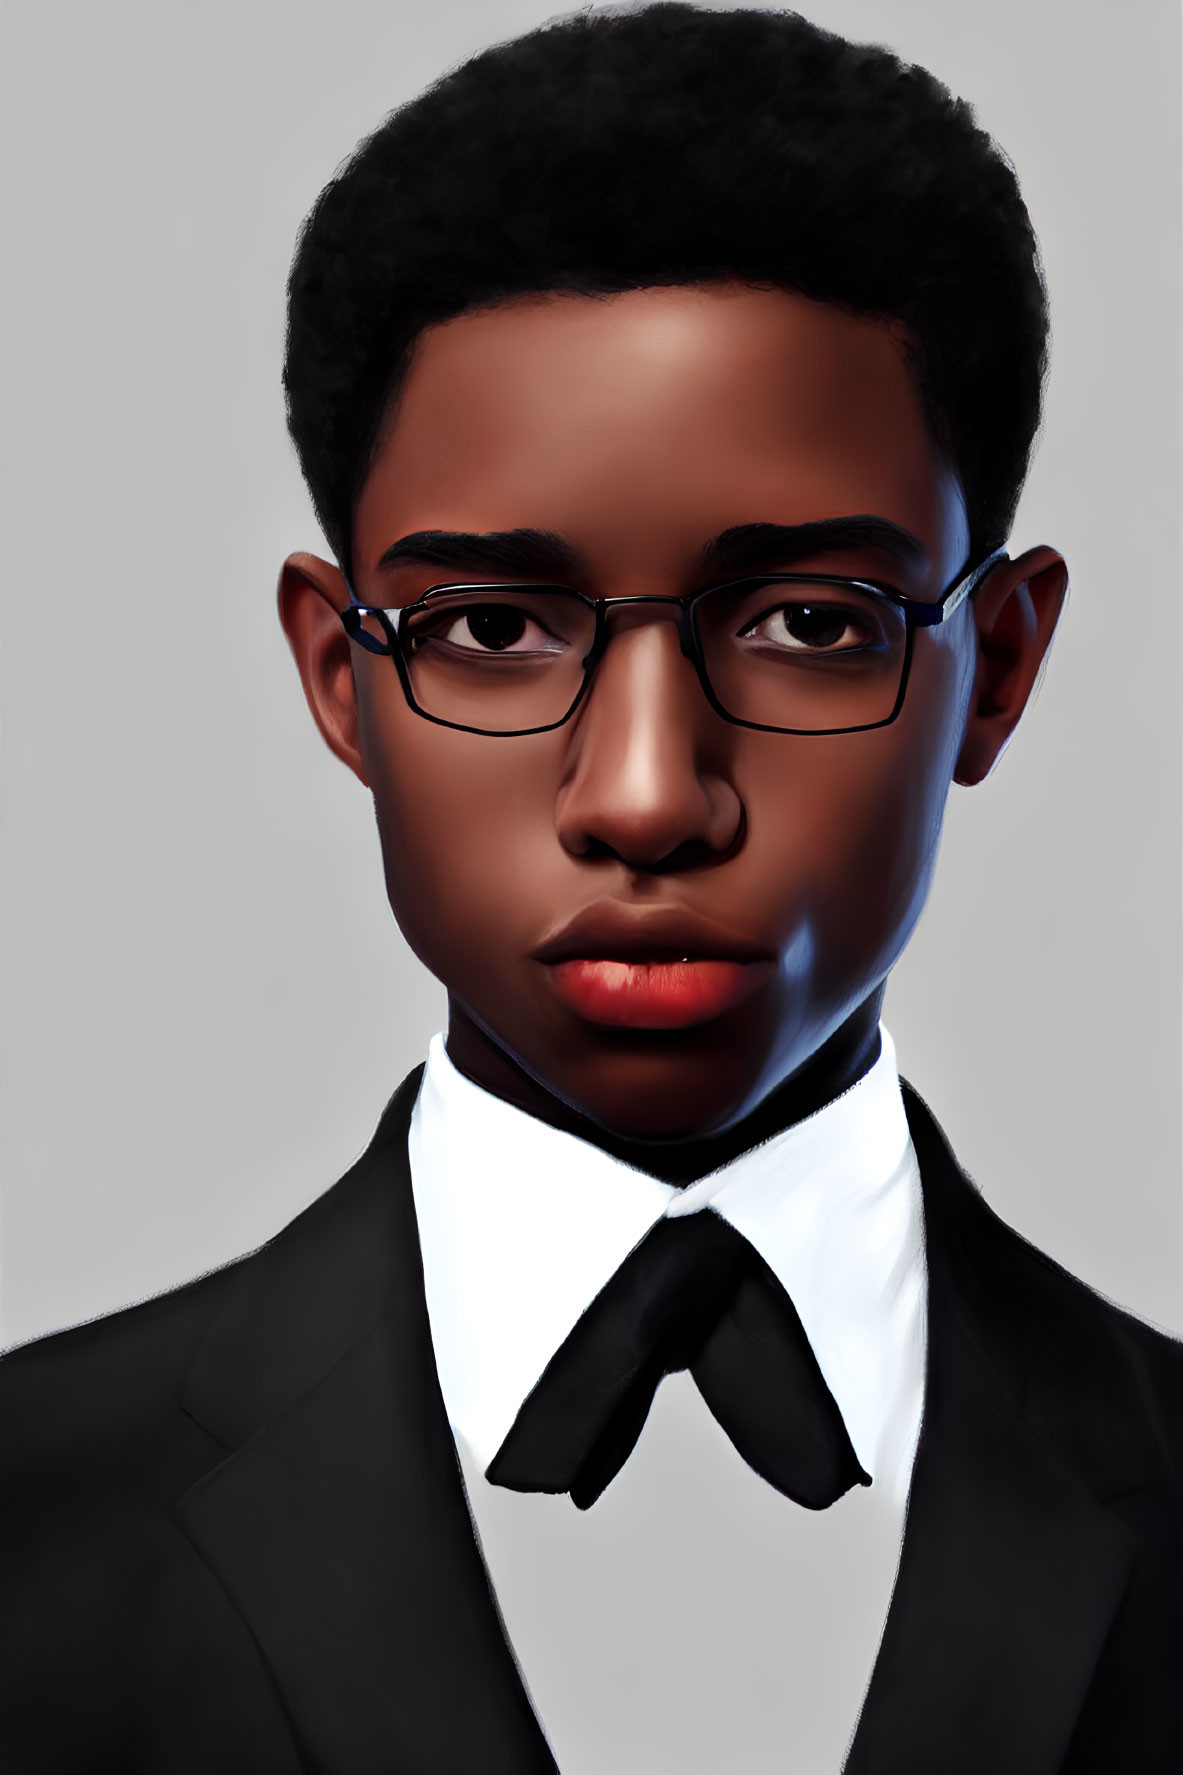 Realistic digital art of young male in glasses, black tuxedo, and bow tie.